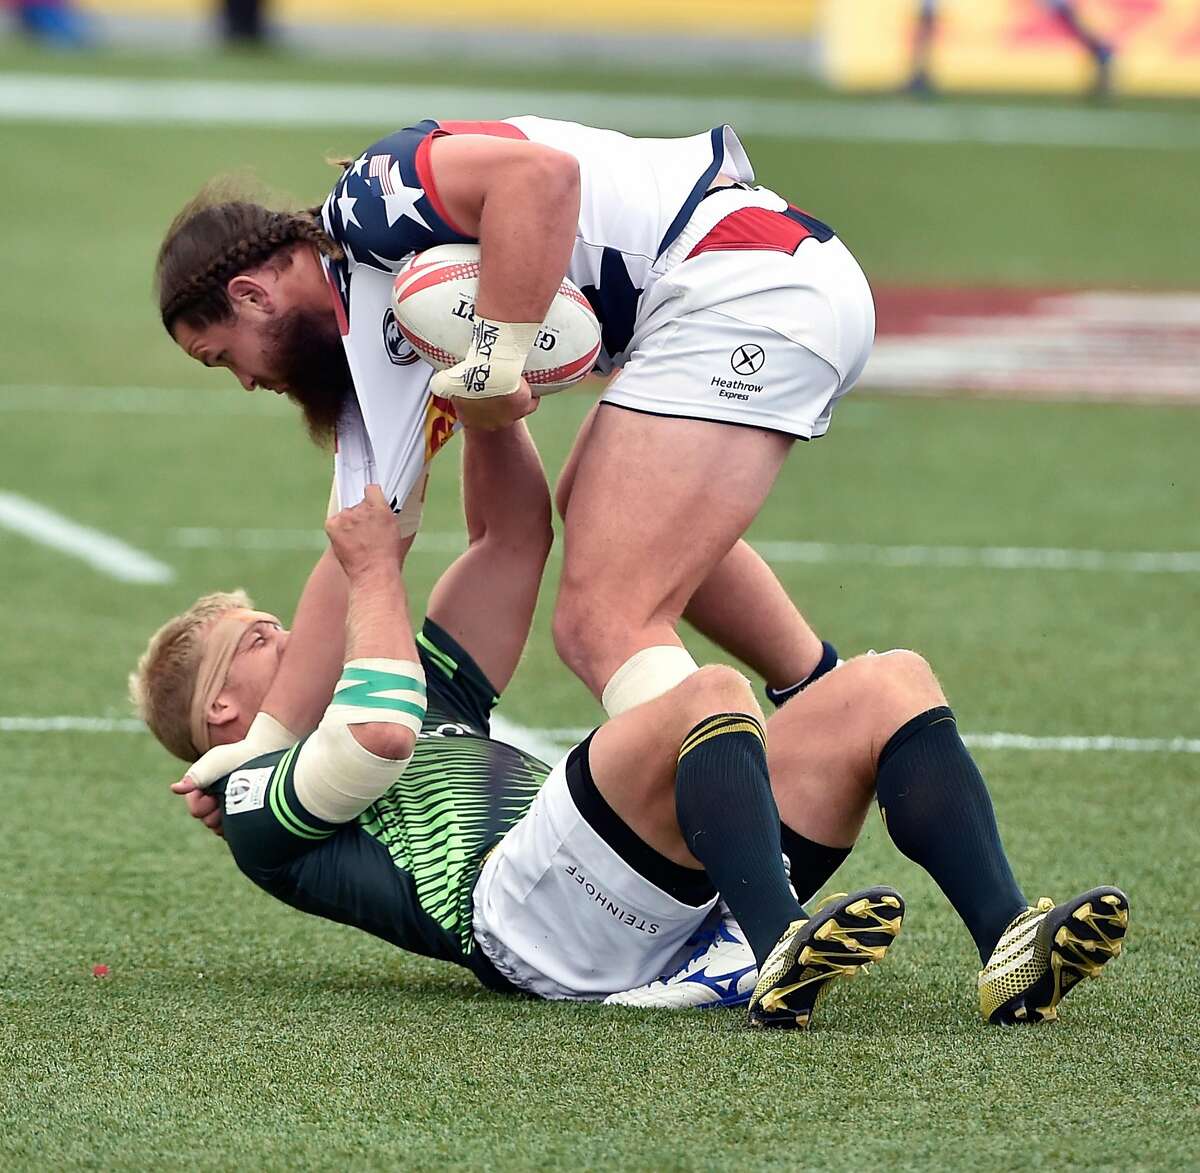 LAS VEGAS, NV - MARCH 05: Kyle Brown of South Africa (bottom) and Danny Barrett of the United States battle for the ball during the USA Sevens Rugby tournament at Sam Boyd Stadium on March 5, 2016 in Las Vegas, Nevada. (Photo by David Becker/Getty Images)